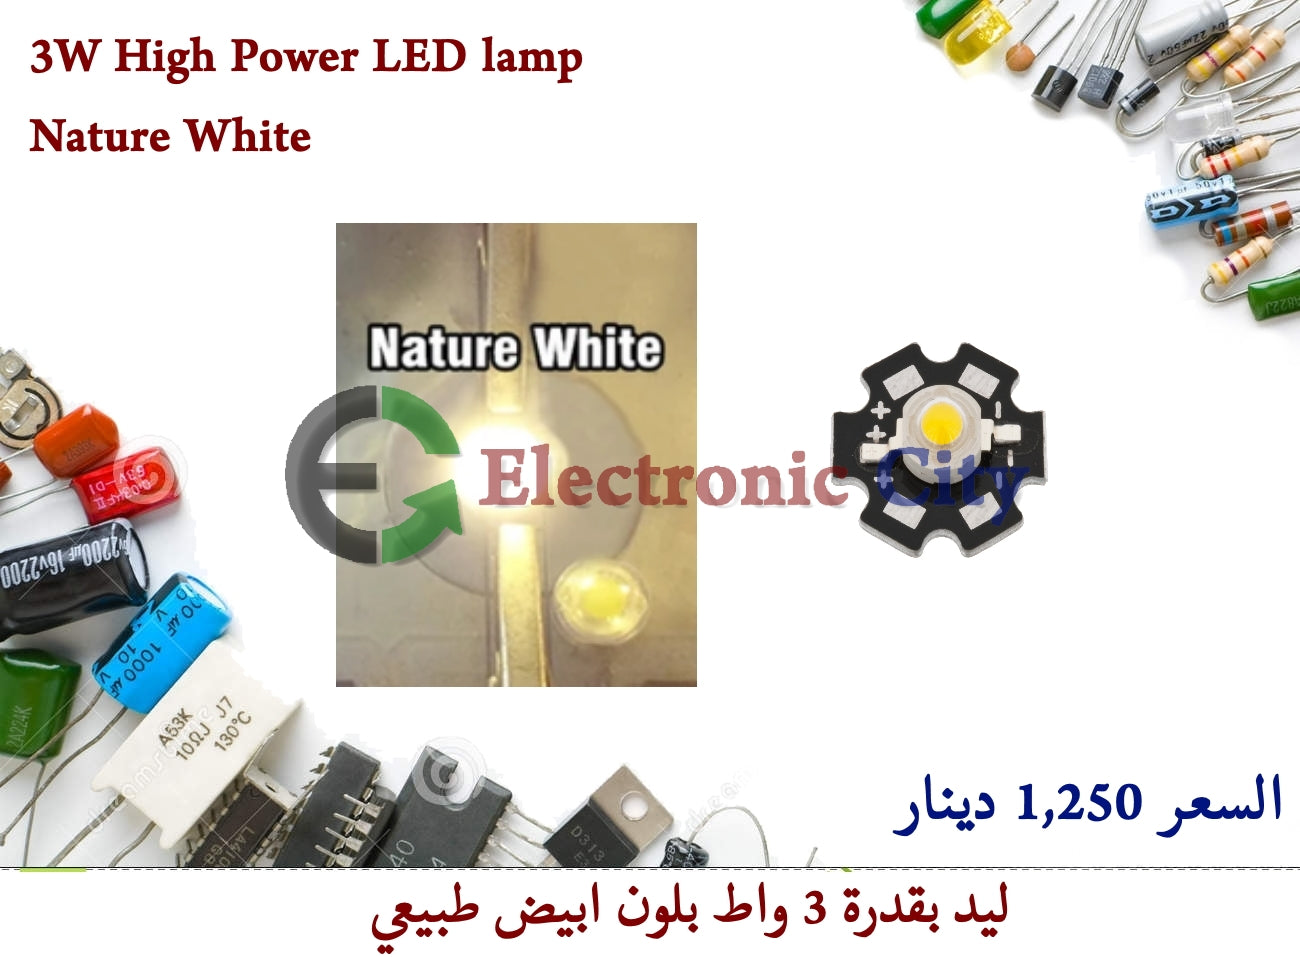 3W High Power LED lamp Naturally white with PCB